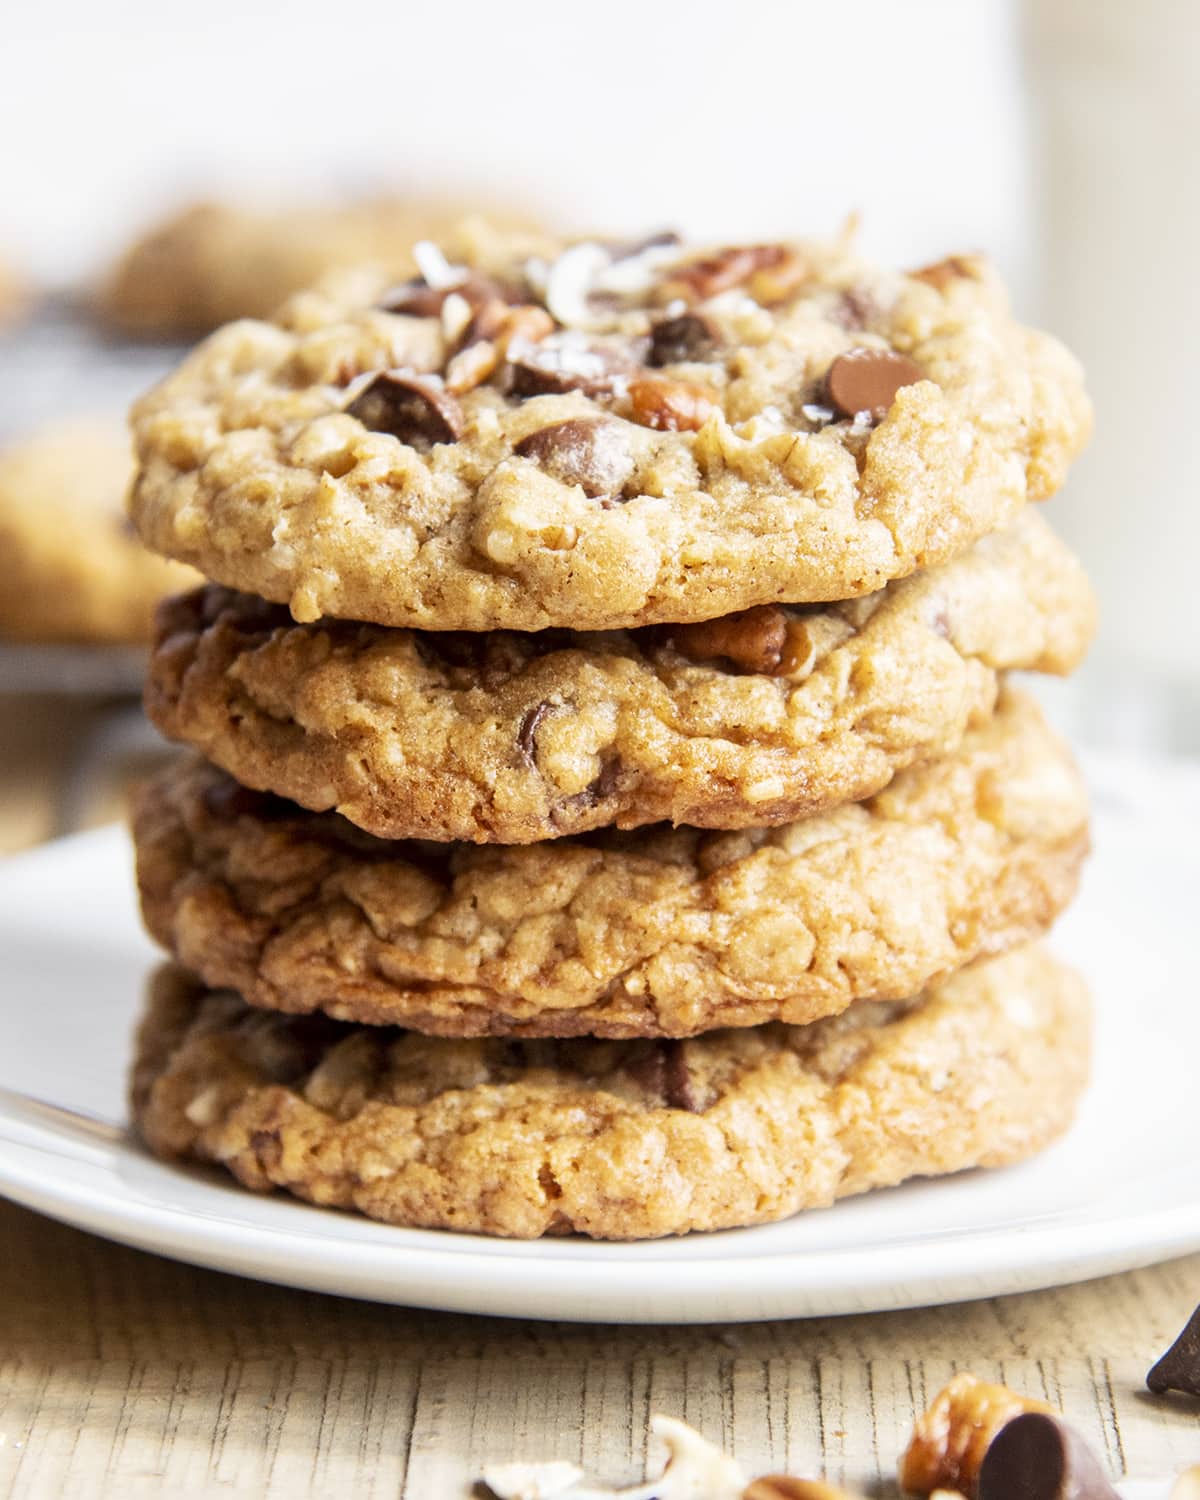 A stack of 4 oatmeal cowboy cookies on a plate.